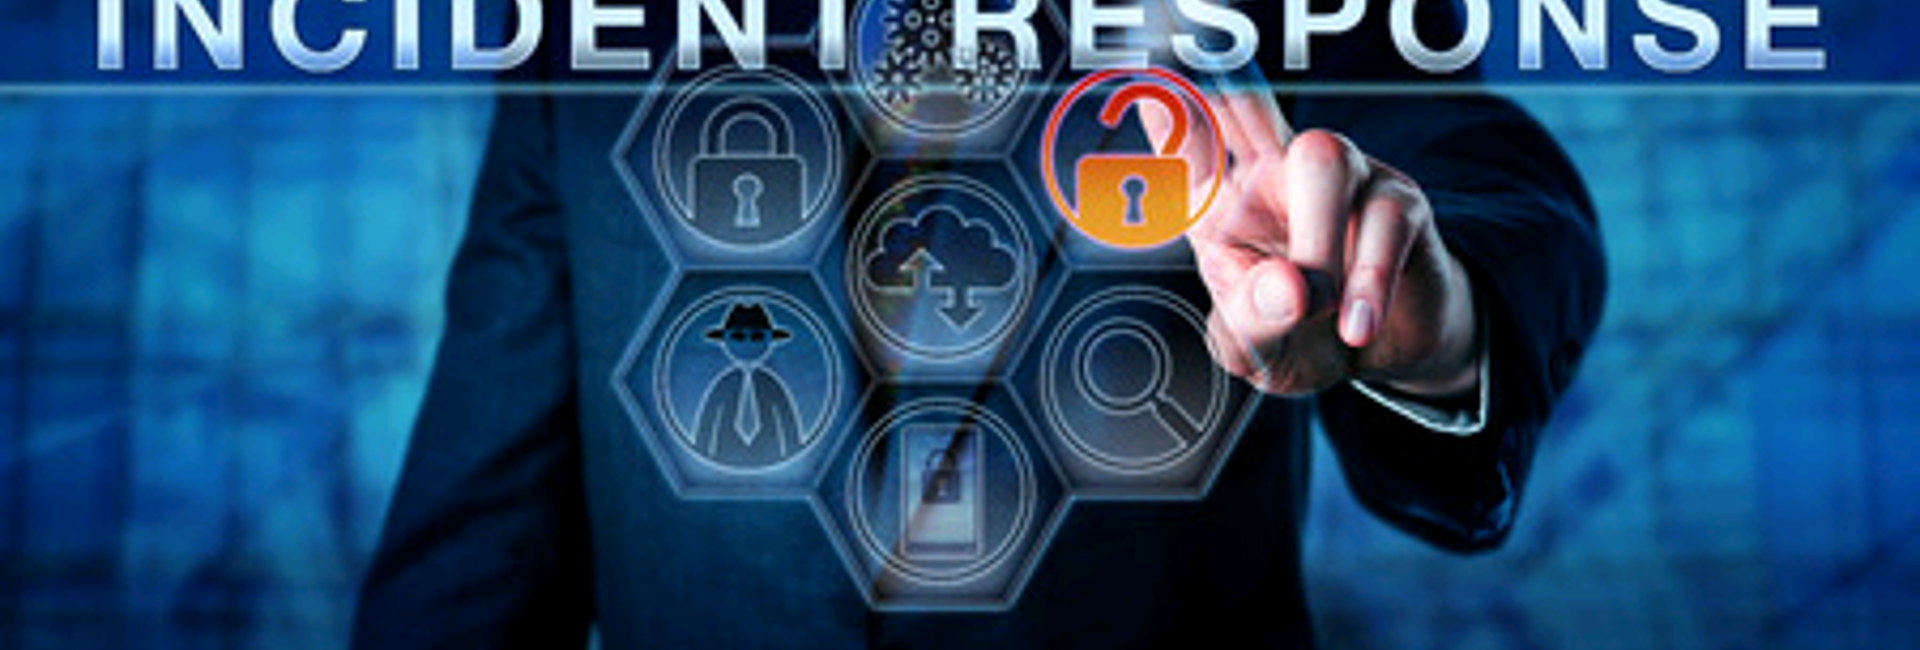 Business man touching a unlocked padlock icon indicating an IT incident response